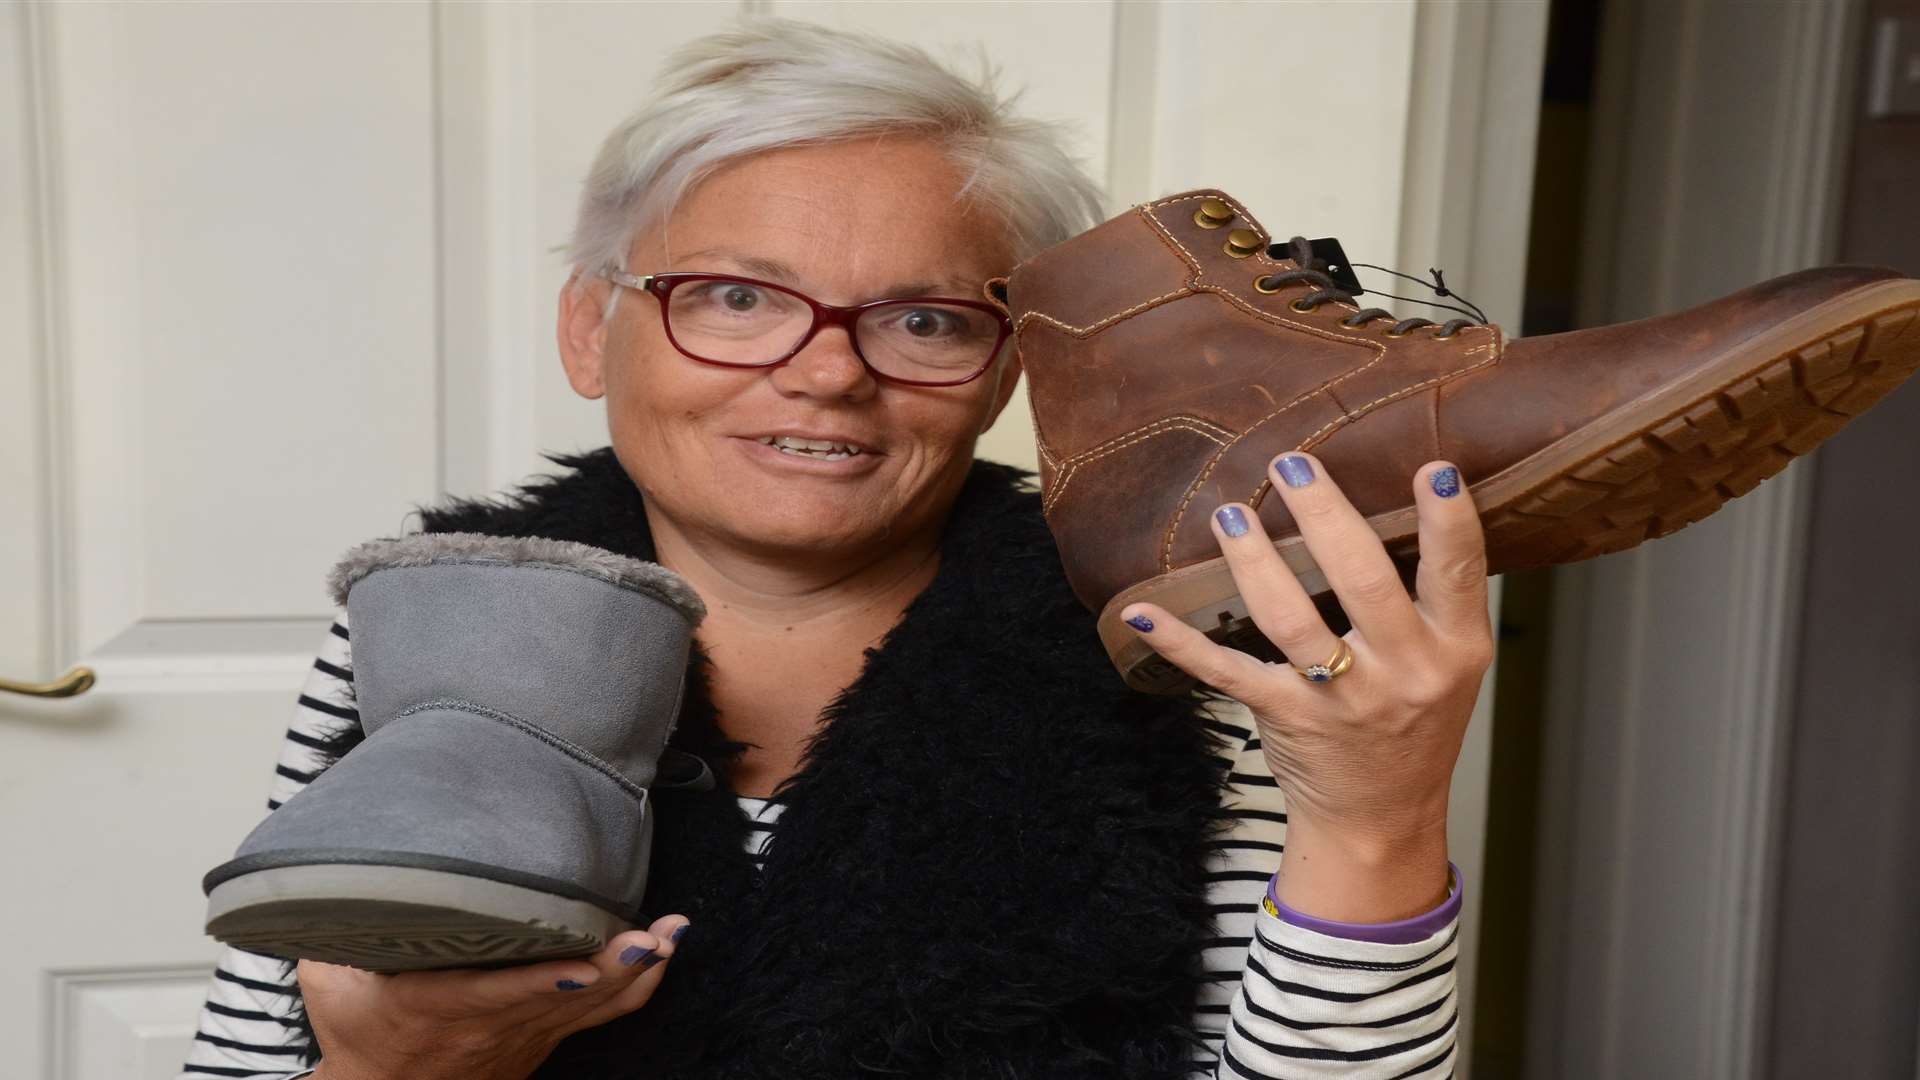 Jo O'Callaghan who has a chronic medical condition has now set up an odd shoe swapping group